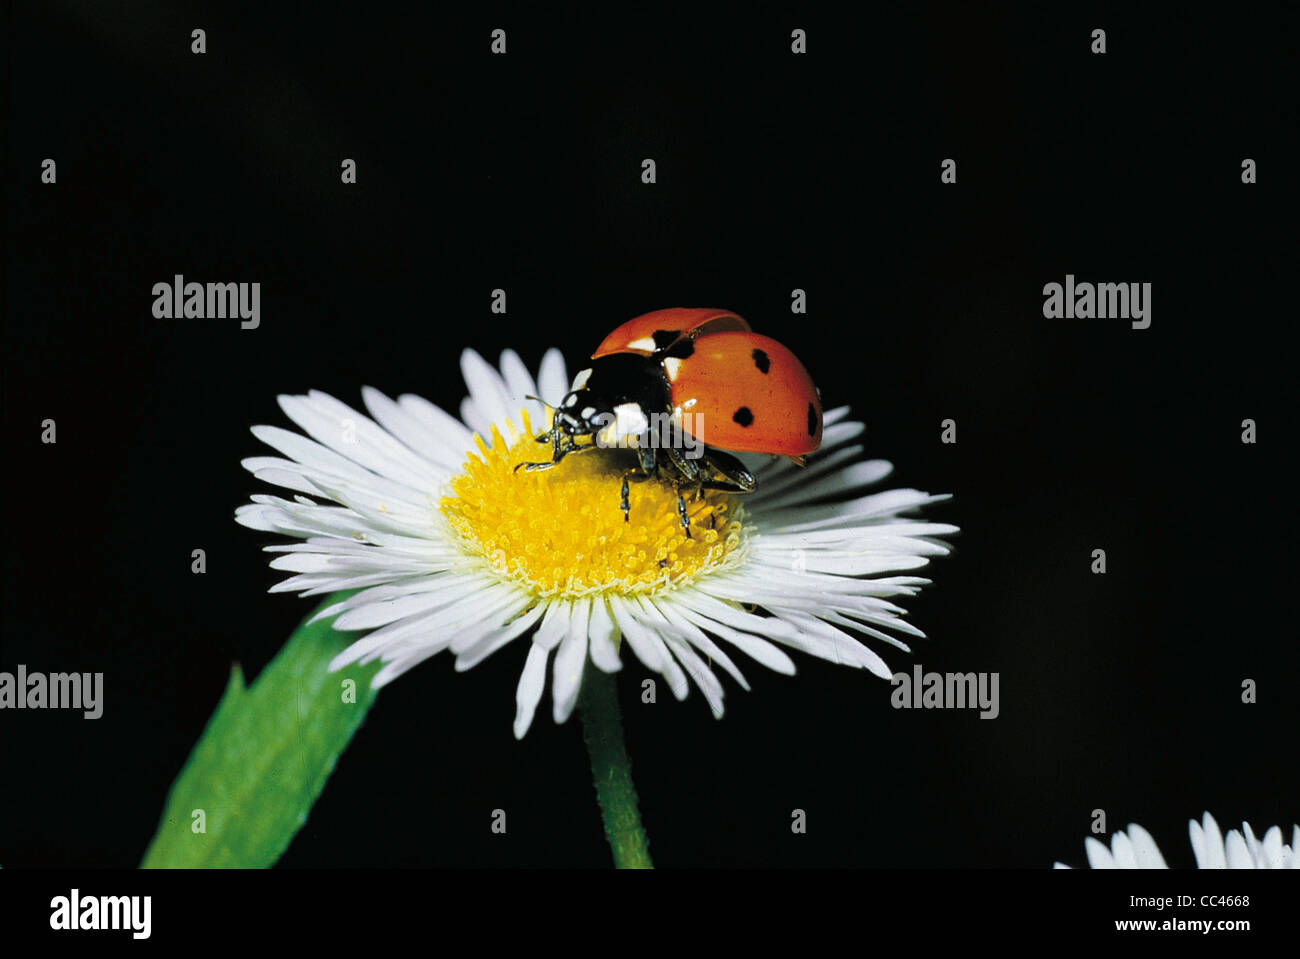 Zoology - Insects - Coleopters - Sevenspotted Ladybeetle (Coccinella Septempunctata). Stock Photo